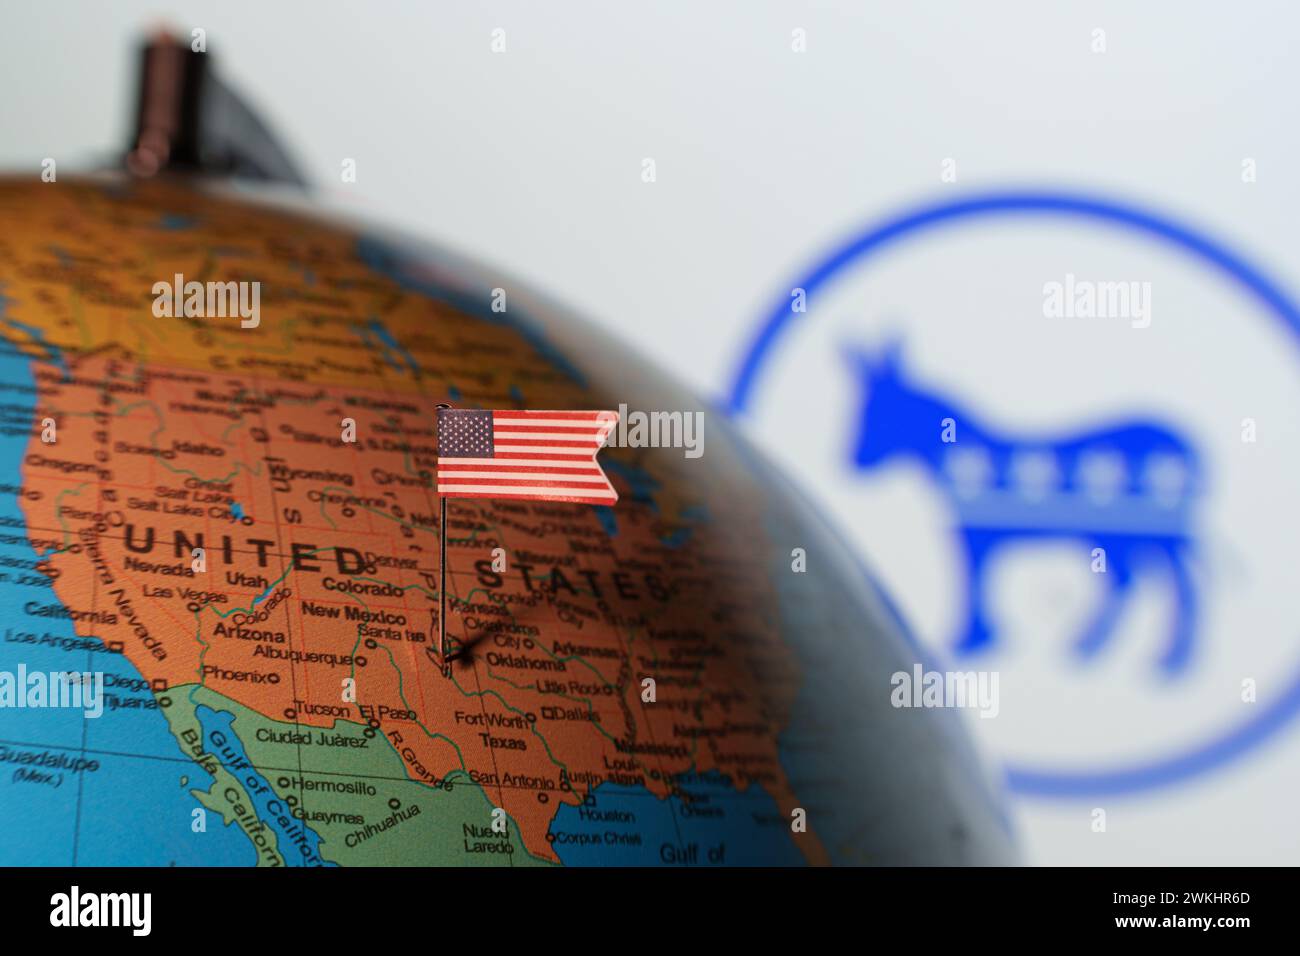 USA national flag and Democratic Party logo for political elections. US presidential elections Stock Photo